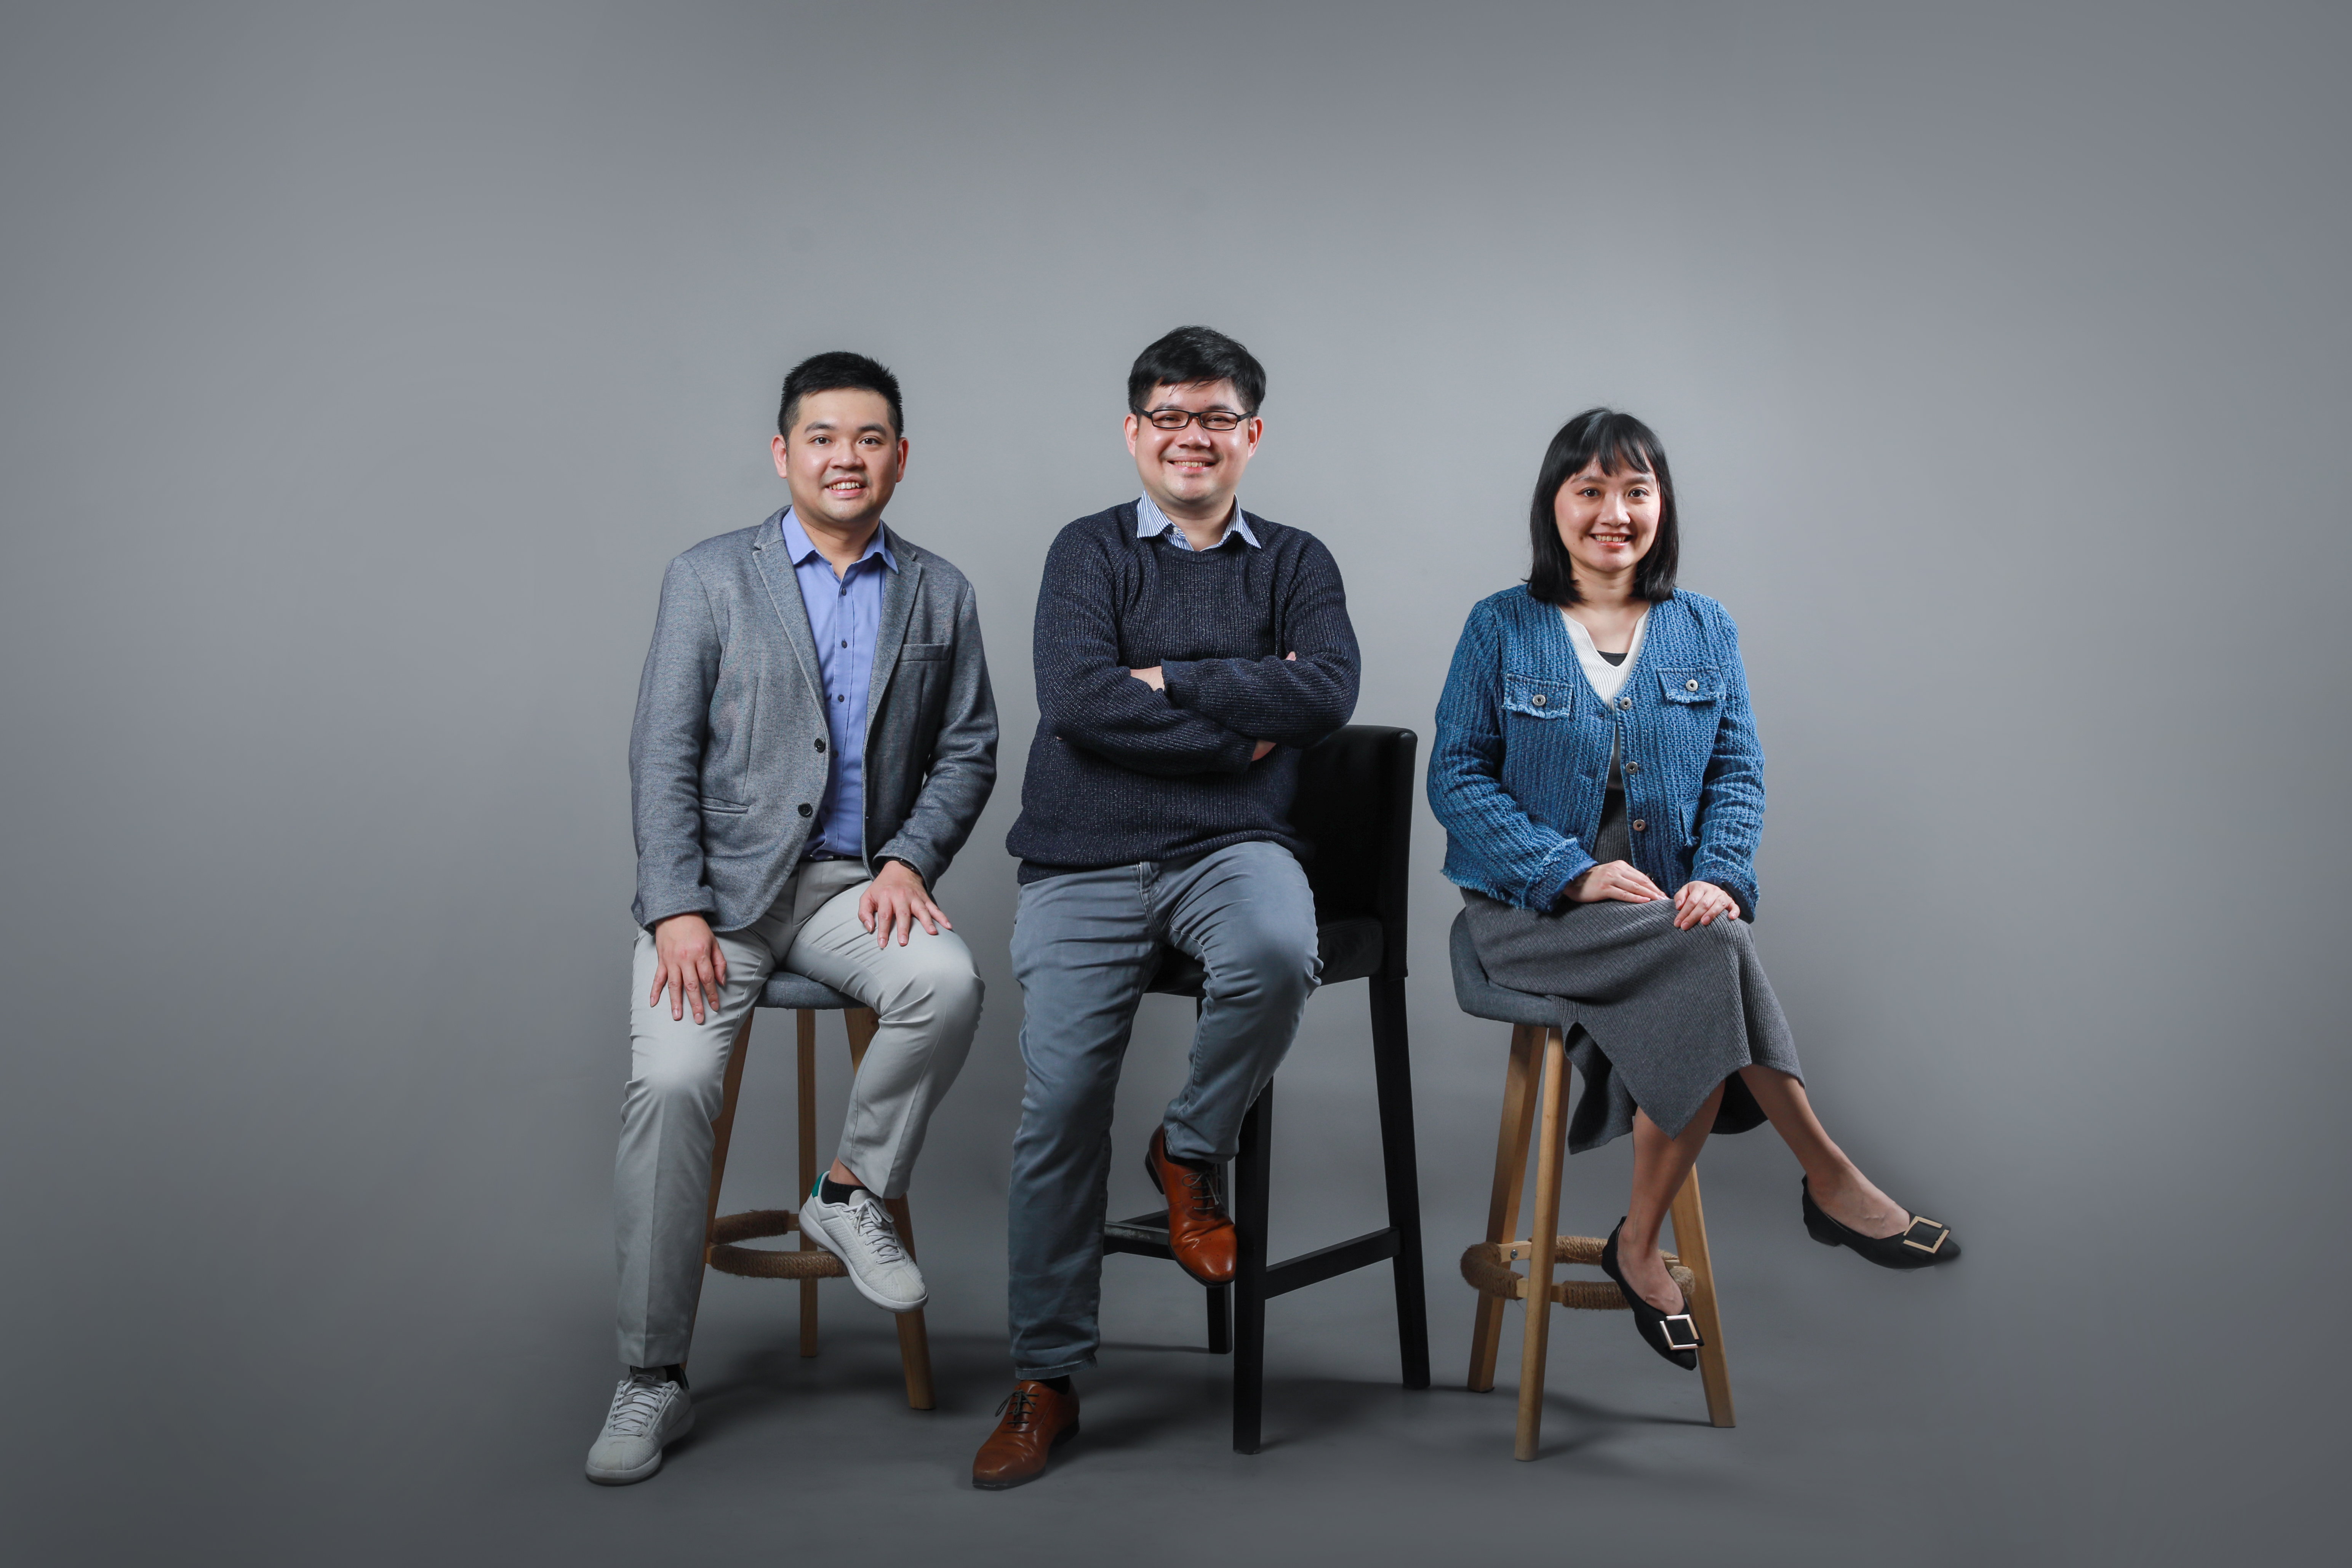 (From left to right) Mr. Kelvin Yeung, Co-Founder & Co-COO of MediConCen; Mr. William Yeung, Co-Founder & Co-CEO of MediConCen and Ms. Jenny Lau, Co-Founder & Co-CMO of MediConCen